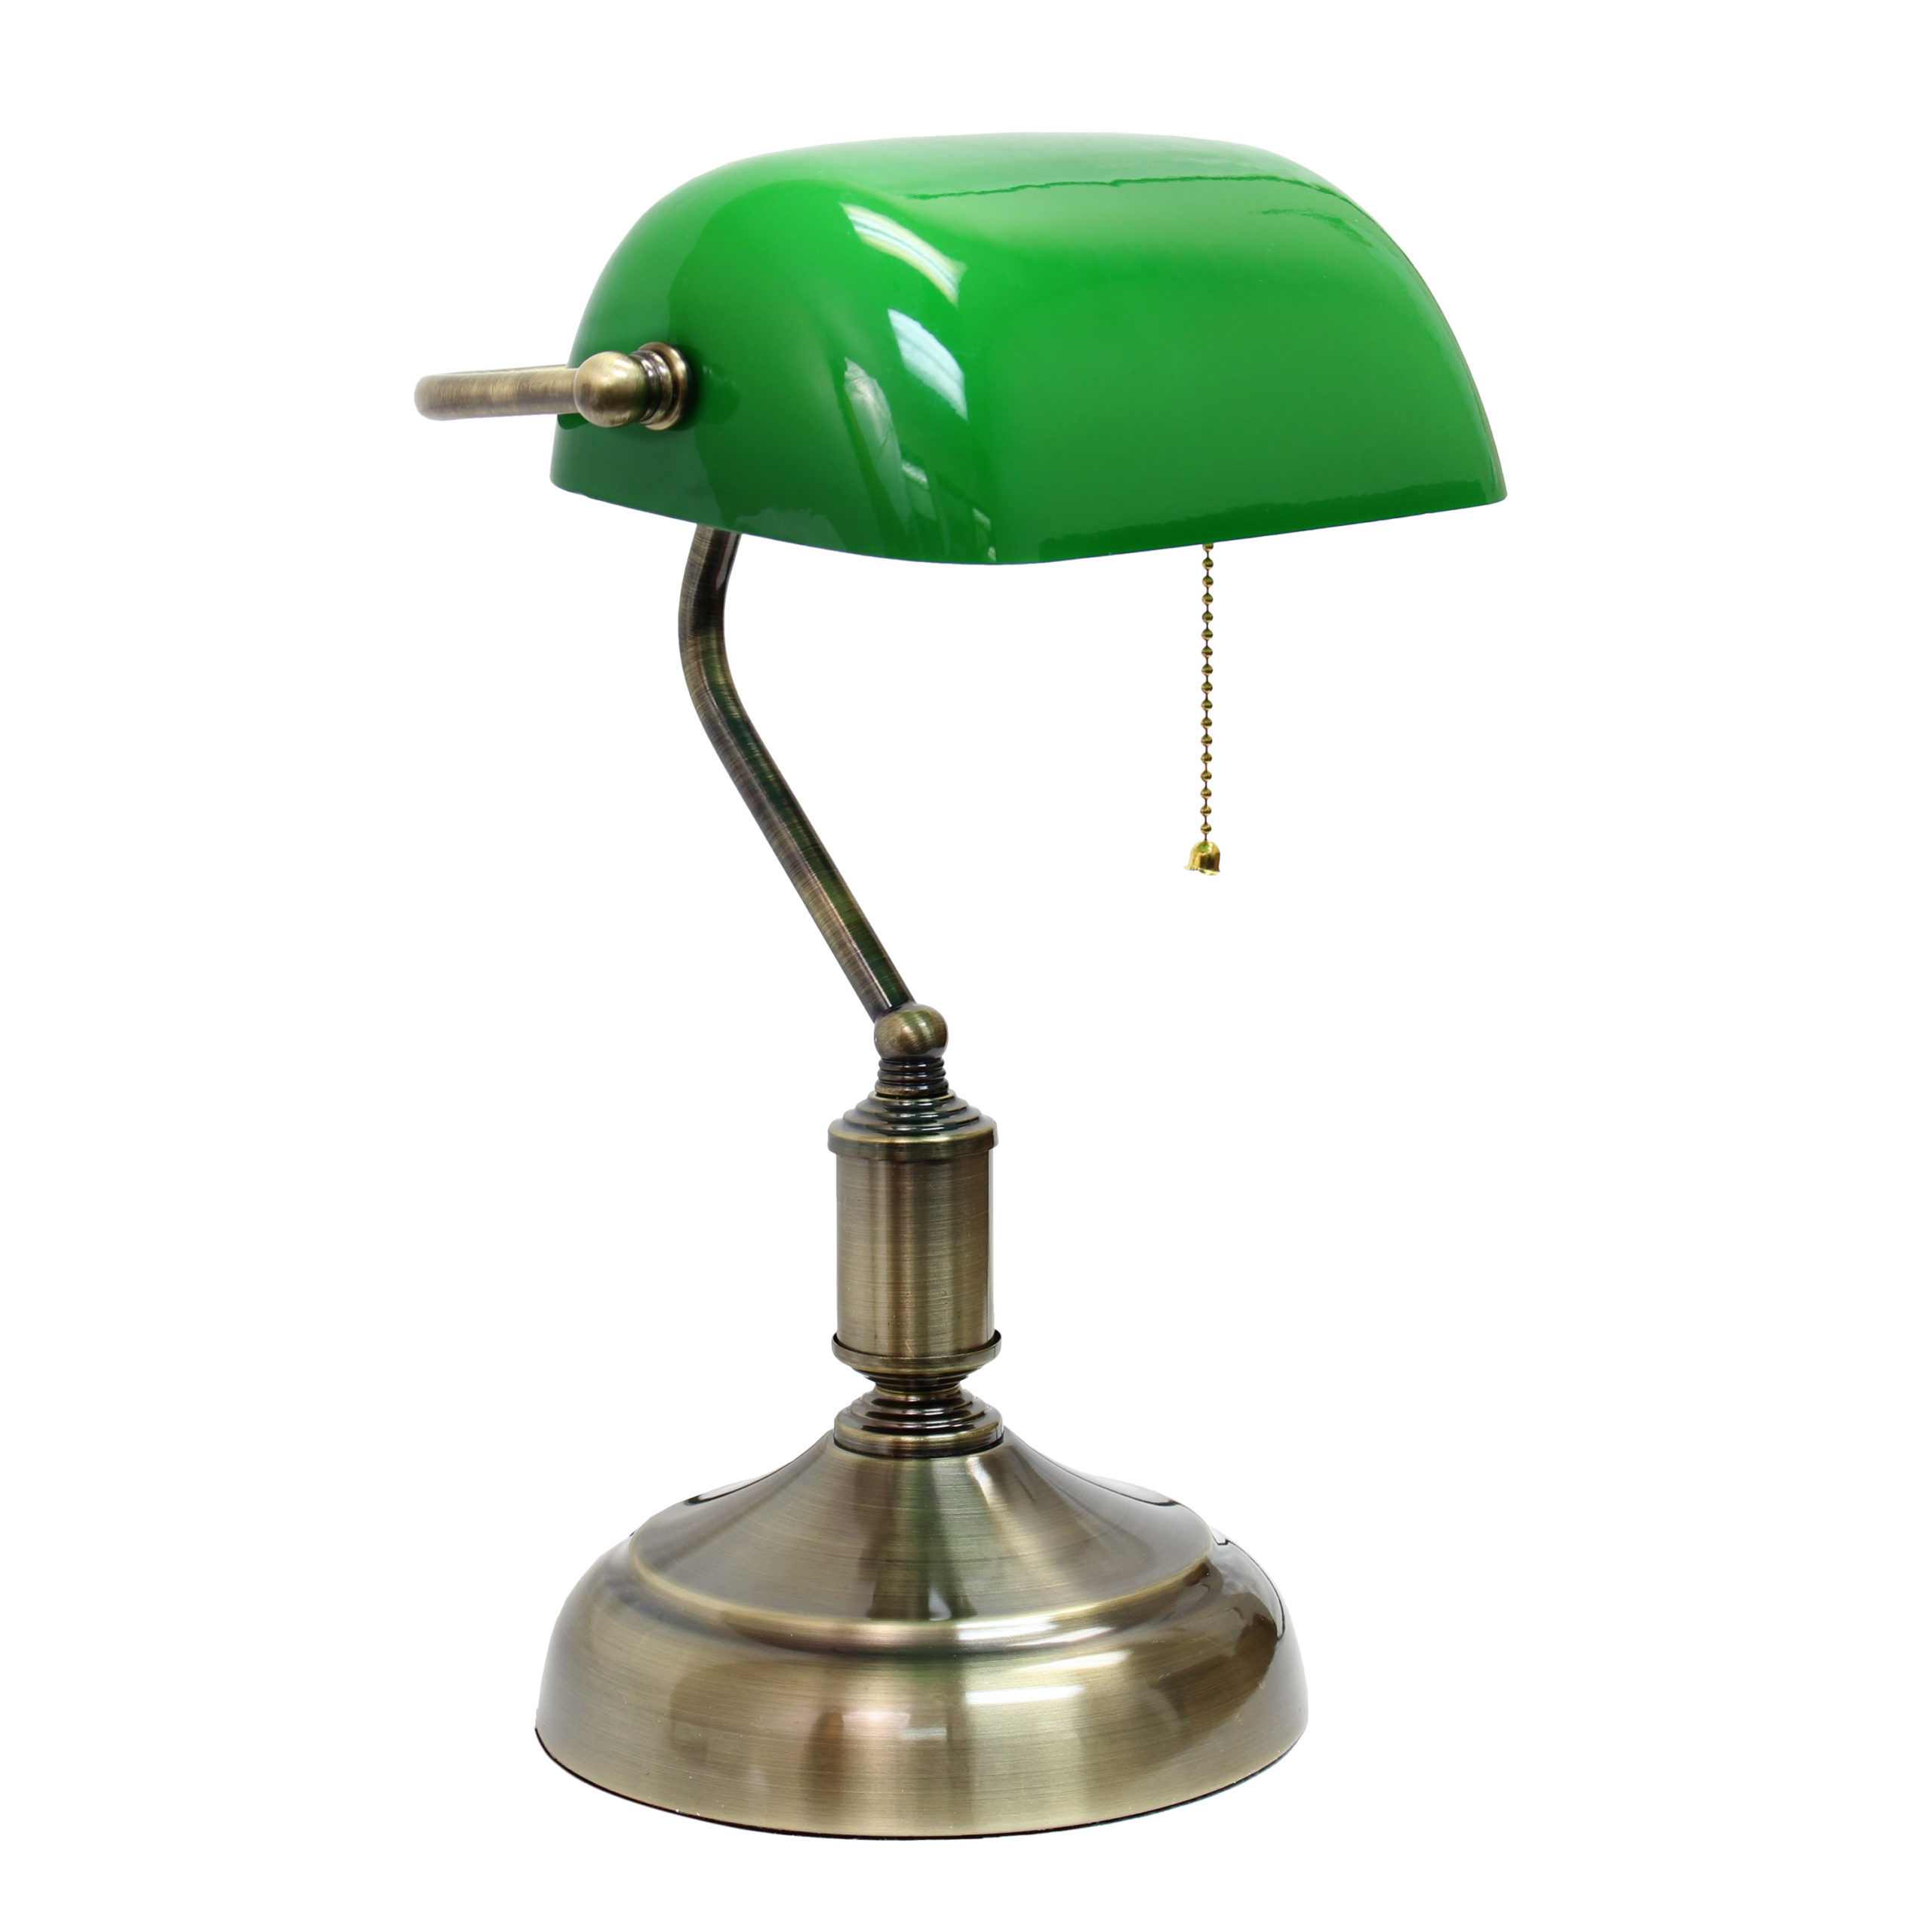 Color : Green Simple Designs Executive Bankers Desk Lamp with Glass Shade Antique Brass LED Desk Lamp Tony home